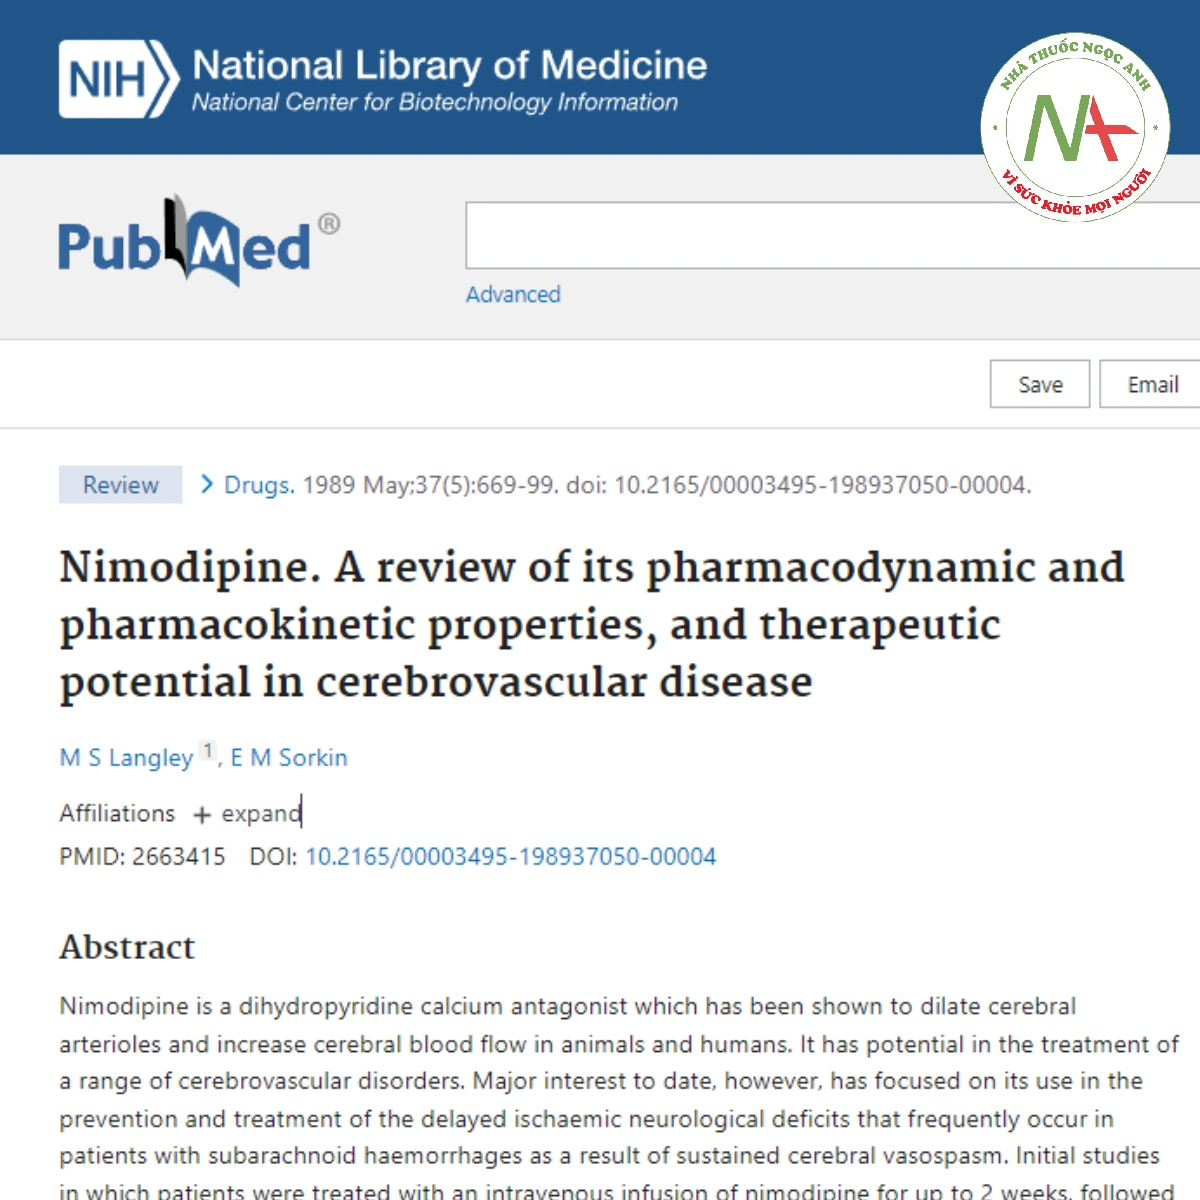 Nimodipine. A review of its pharmacodynamic and pharmacokinetic properties, and therapeutic potential in cerebrovascular disease